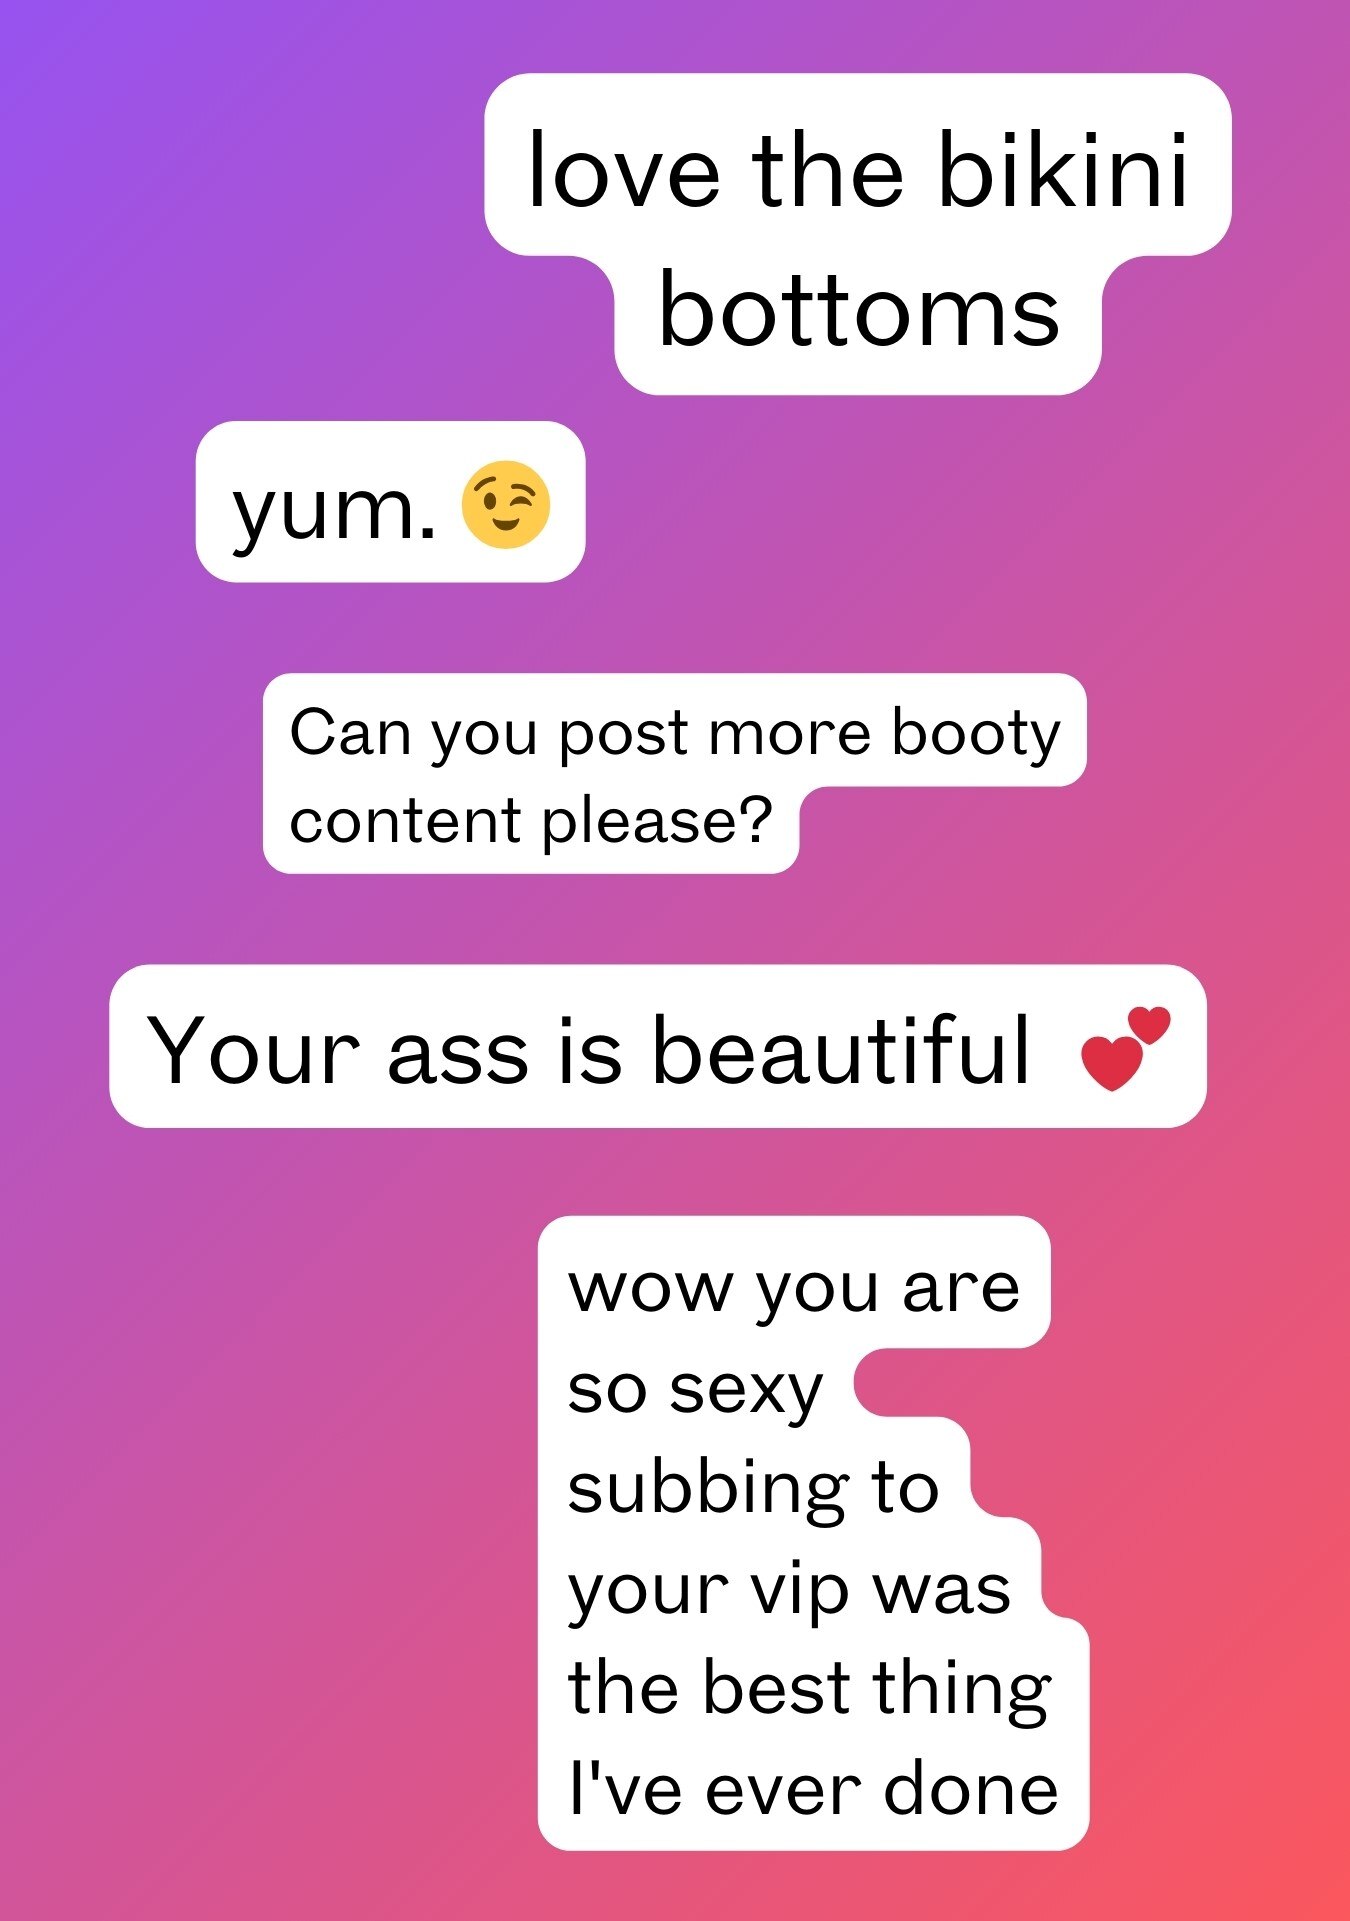 Comments including "your ass is beautiful", "post more booty content", "wow".